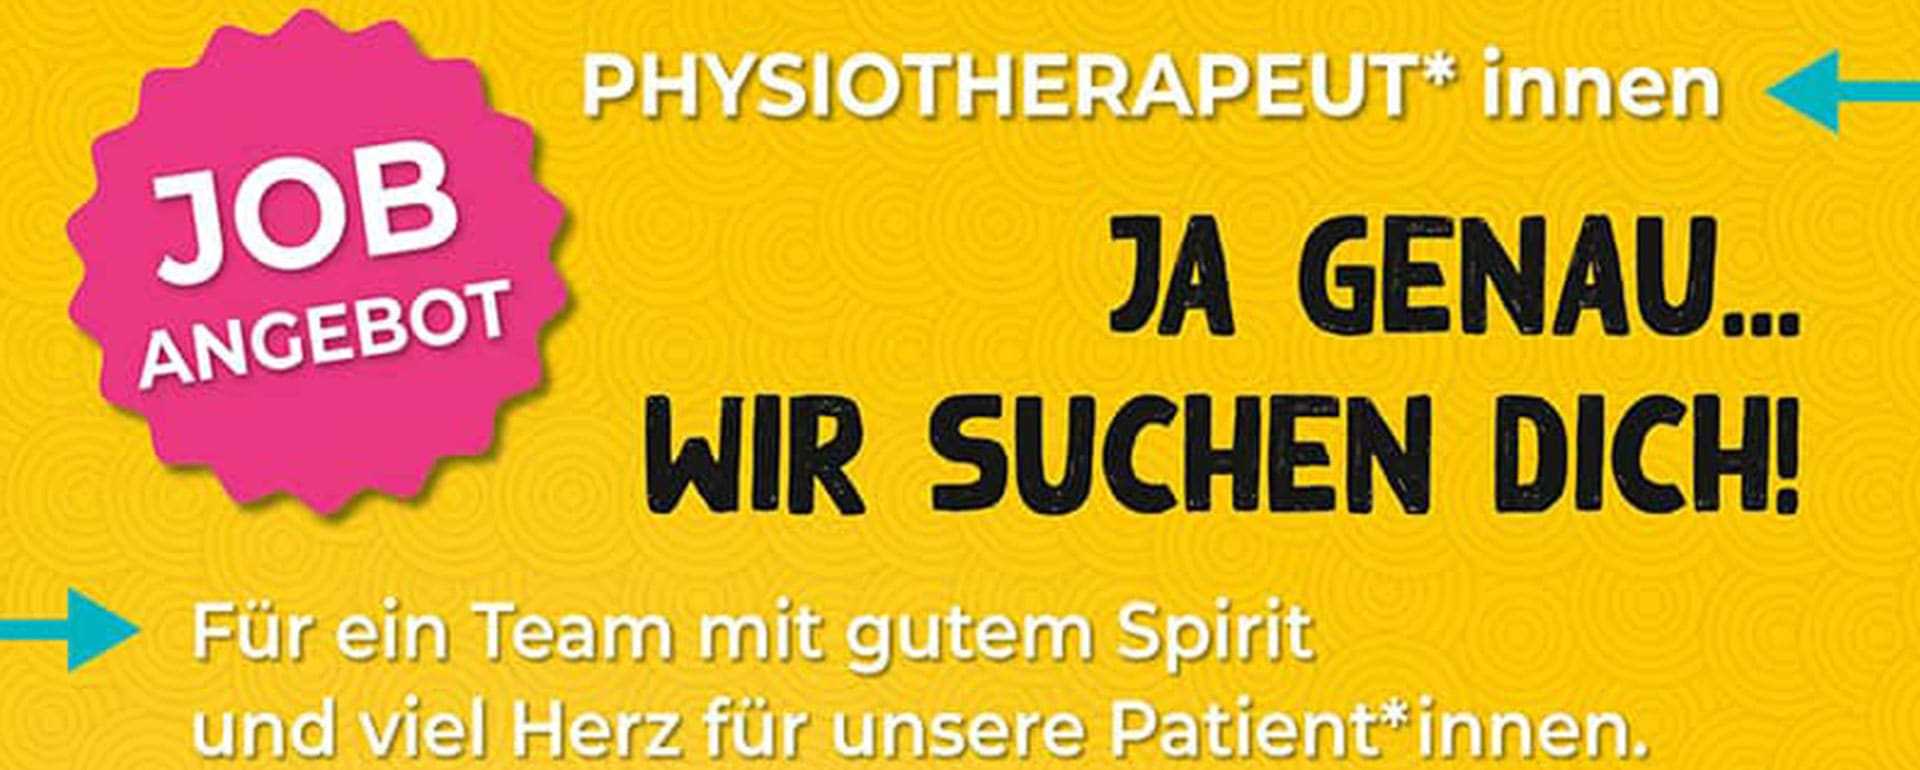 Job Angbot - Physiotherapie Hannover